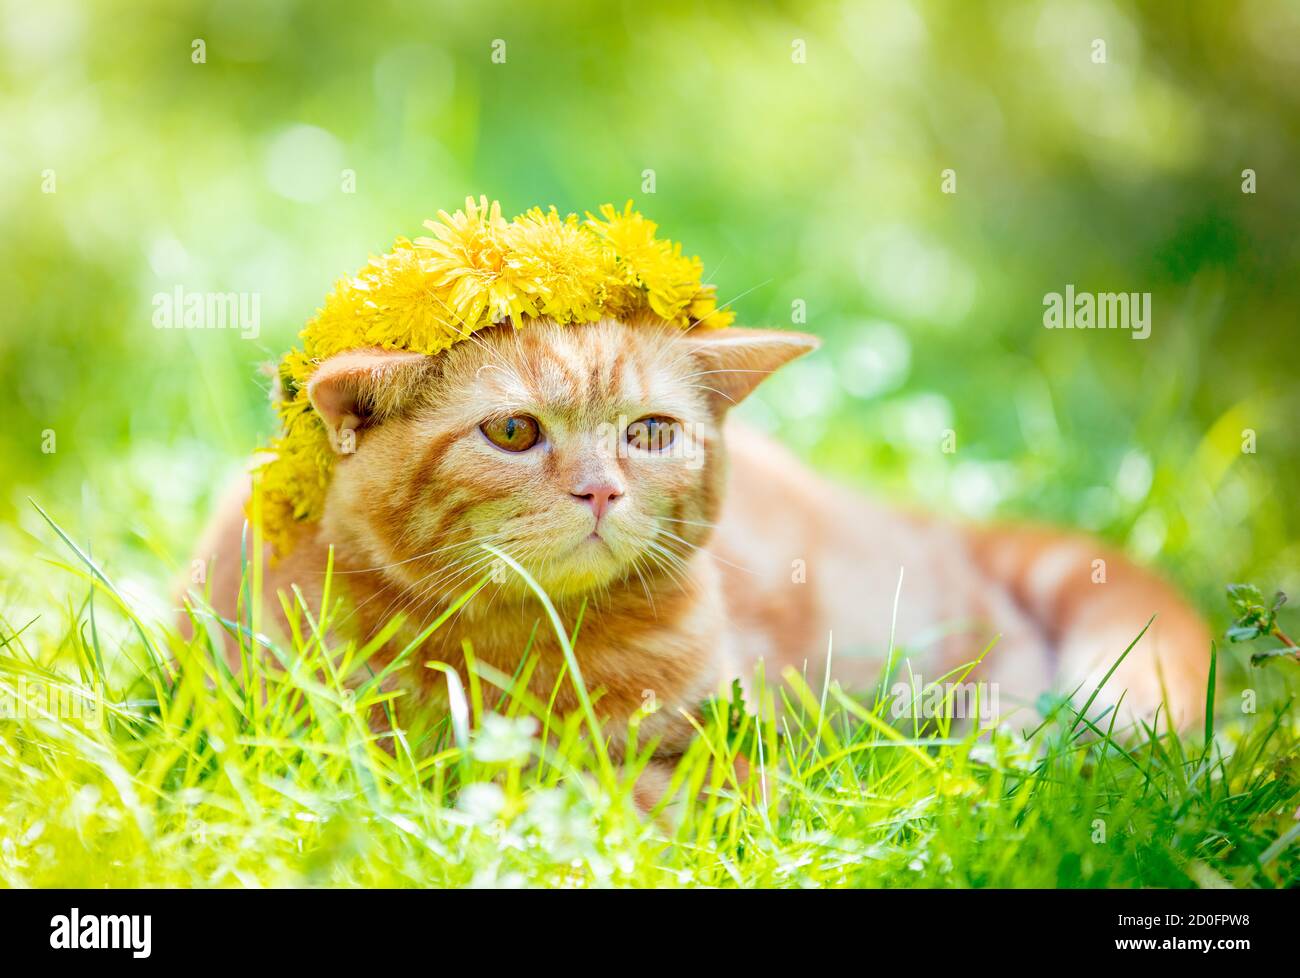 Funny little ginger kitten in a wreath of dandelion flowers lies on the grass Stock Photo